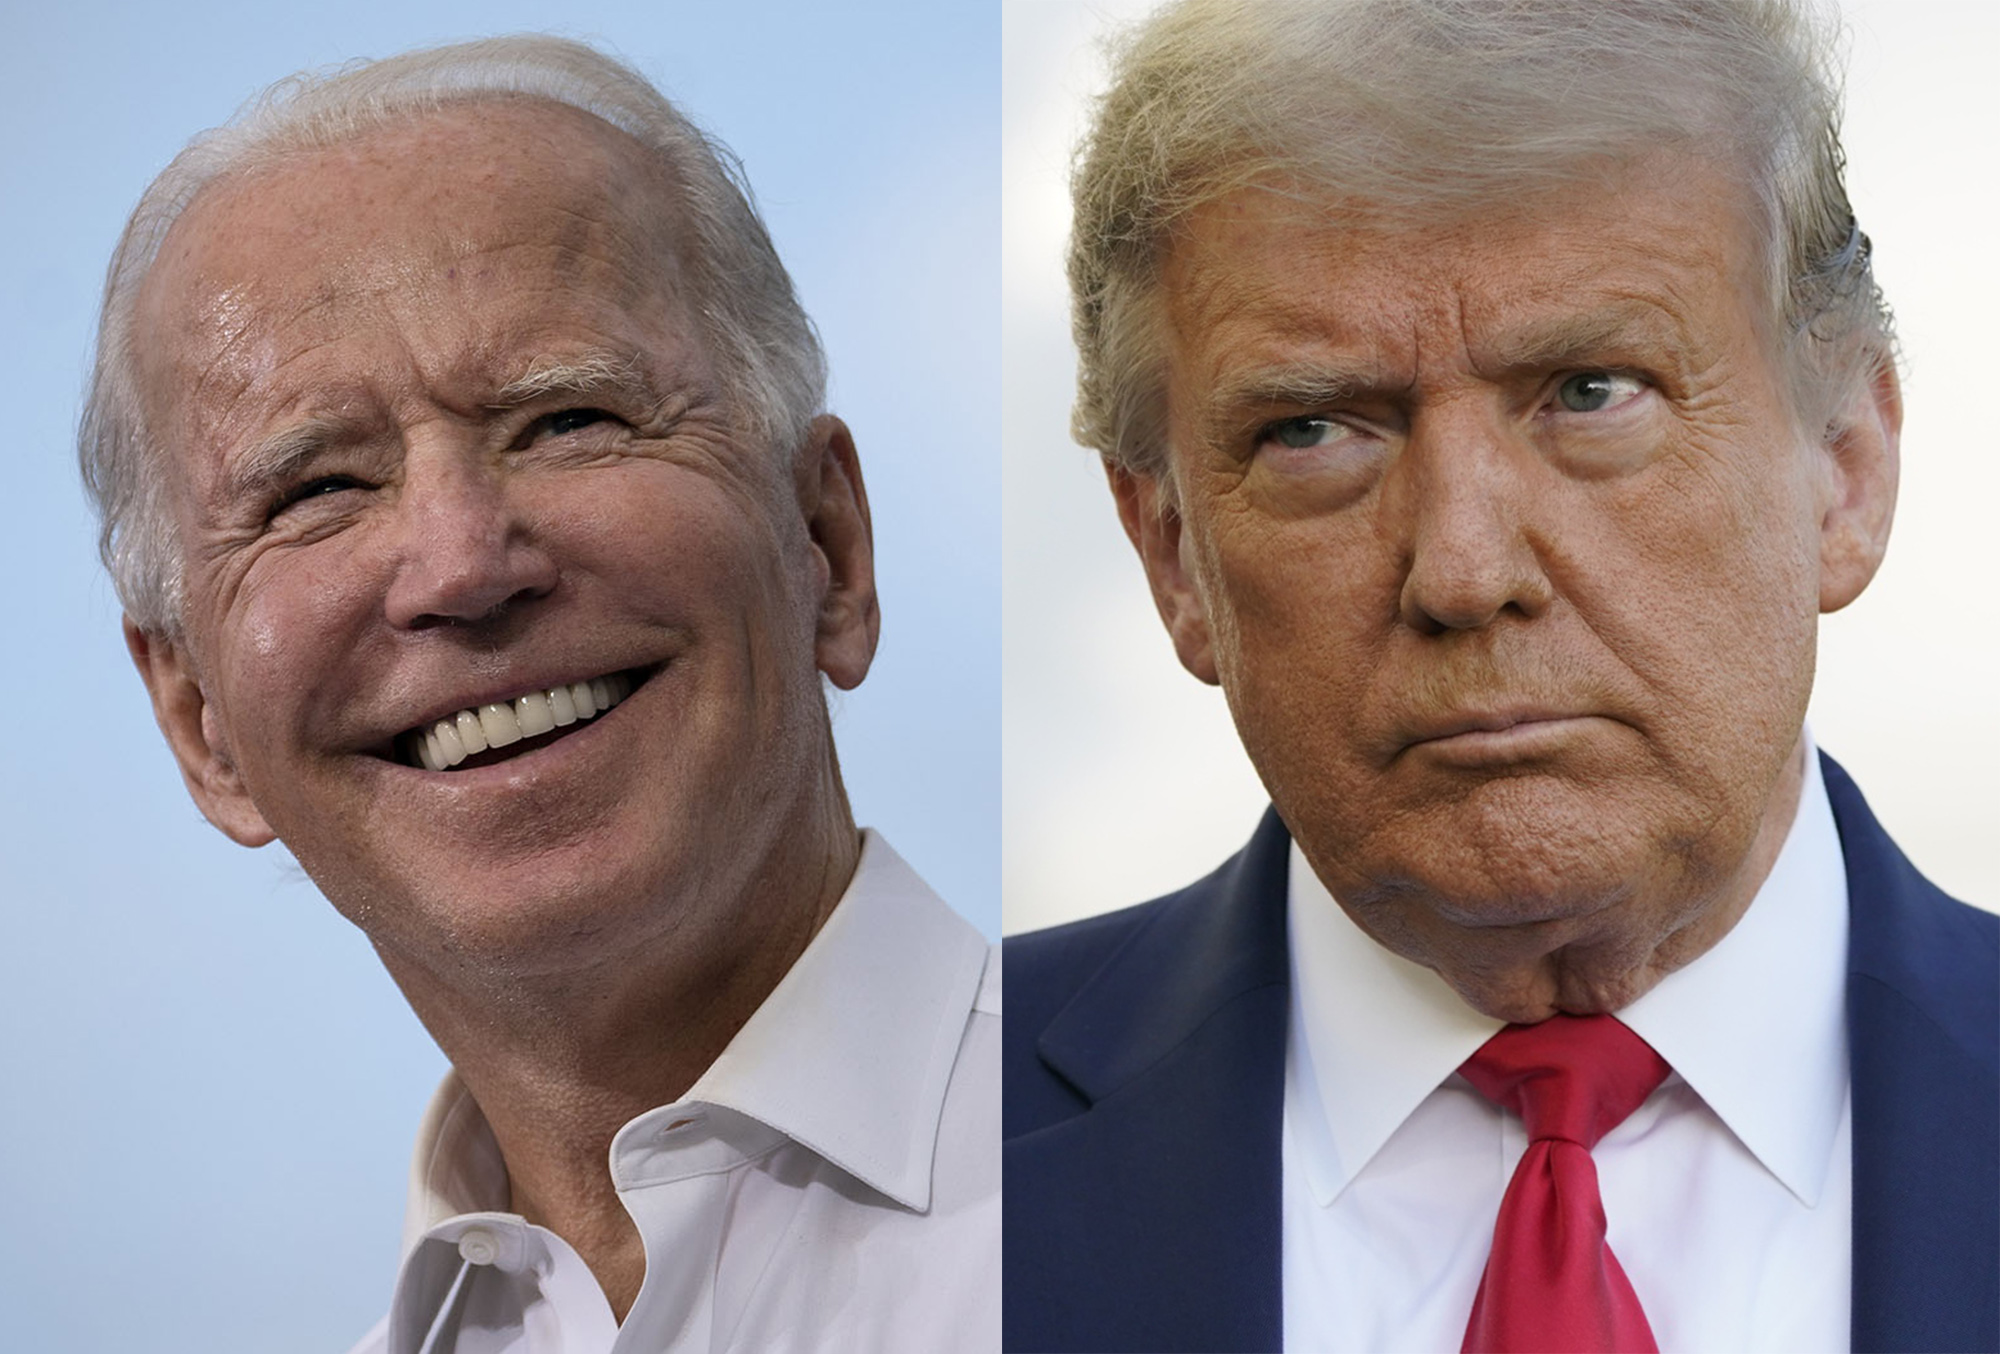 President Biden ‘Would Not Be Disappointed’ With Trump Rematch in 2024